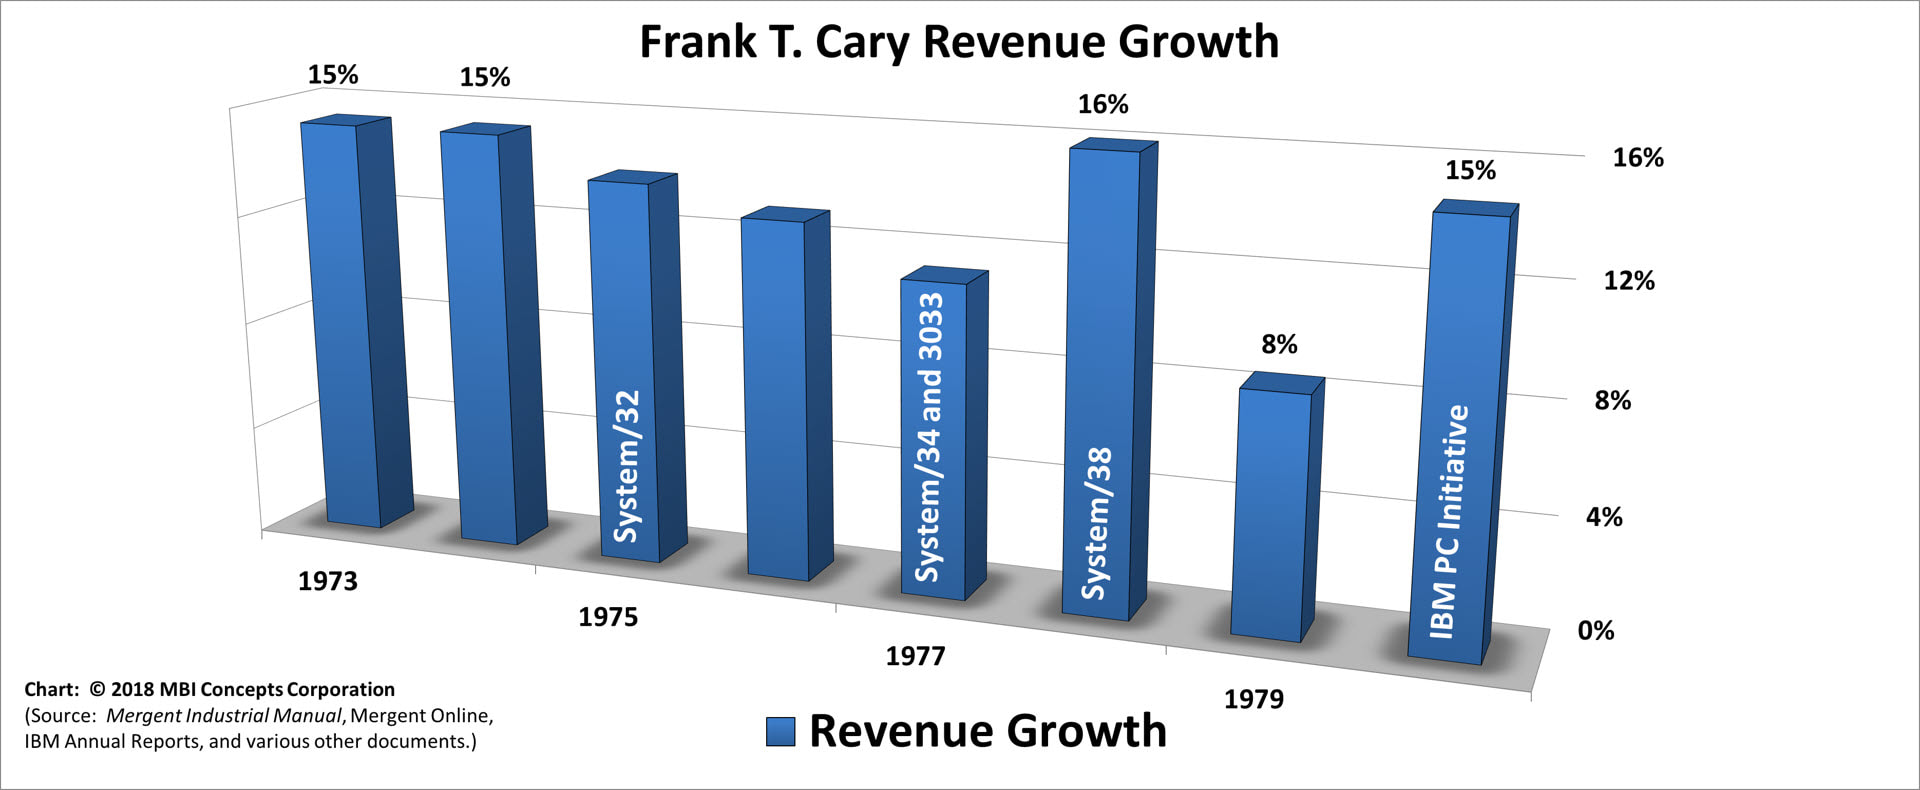 A color bar chart showing IBM's yearly revenue growth from 1973 to 1980 for Frank T. Cary.